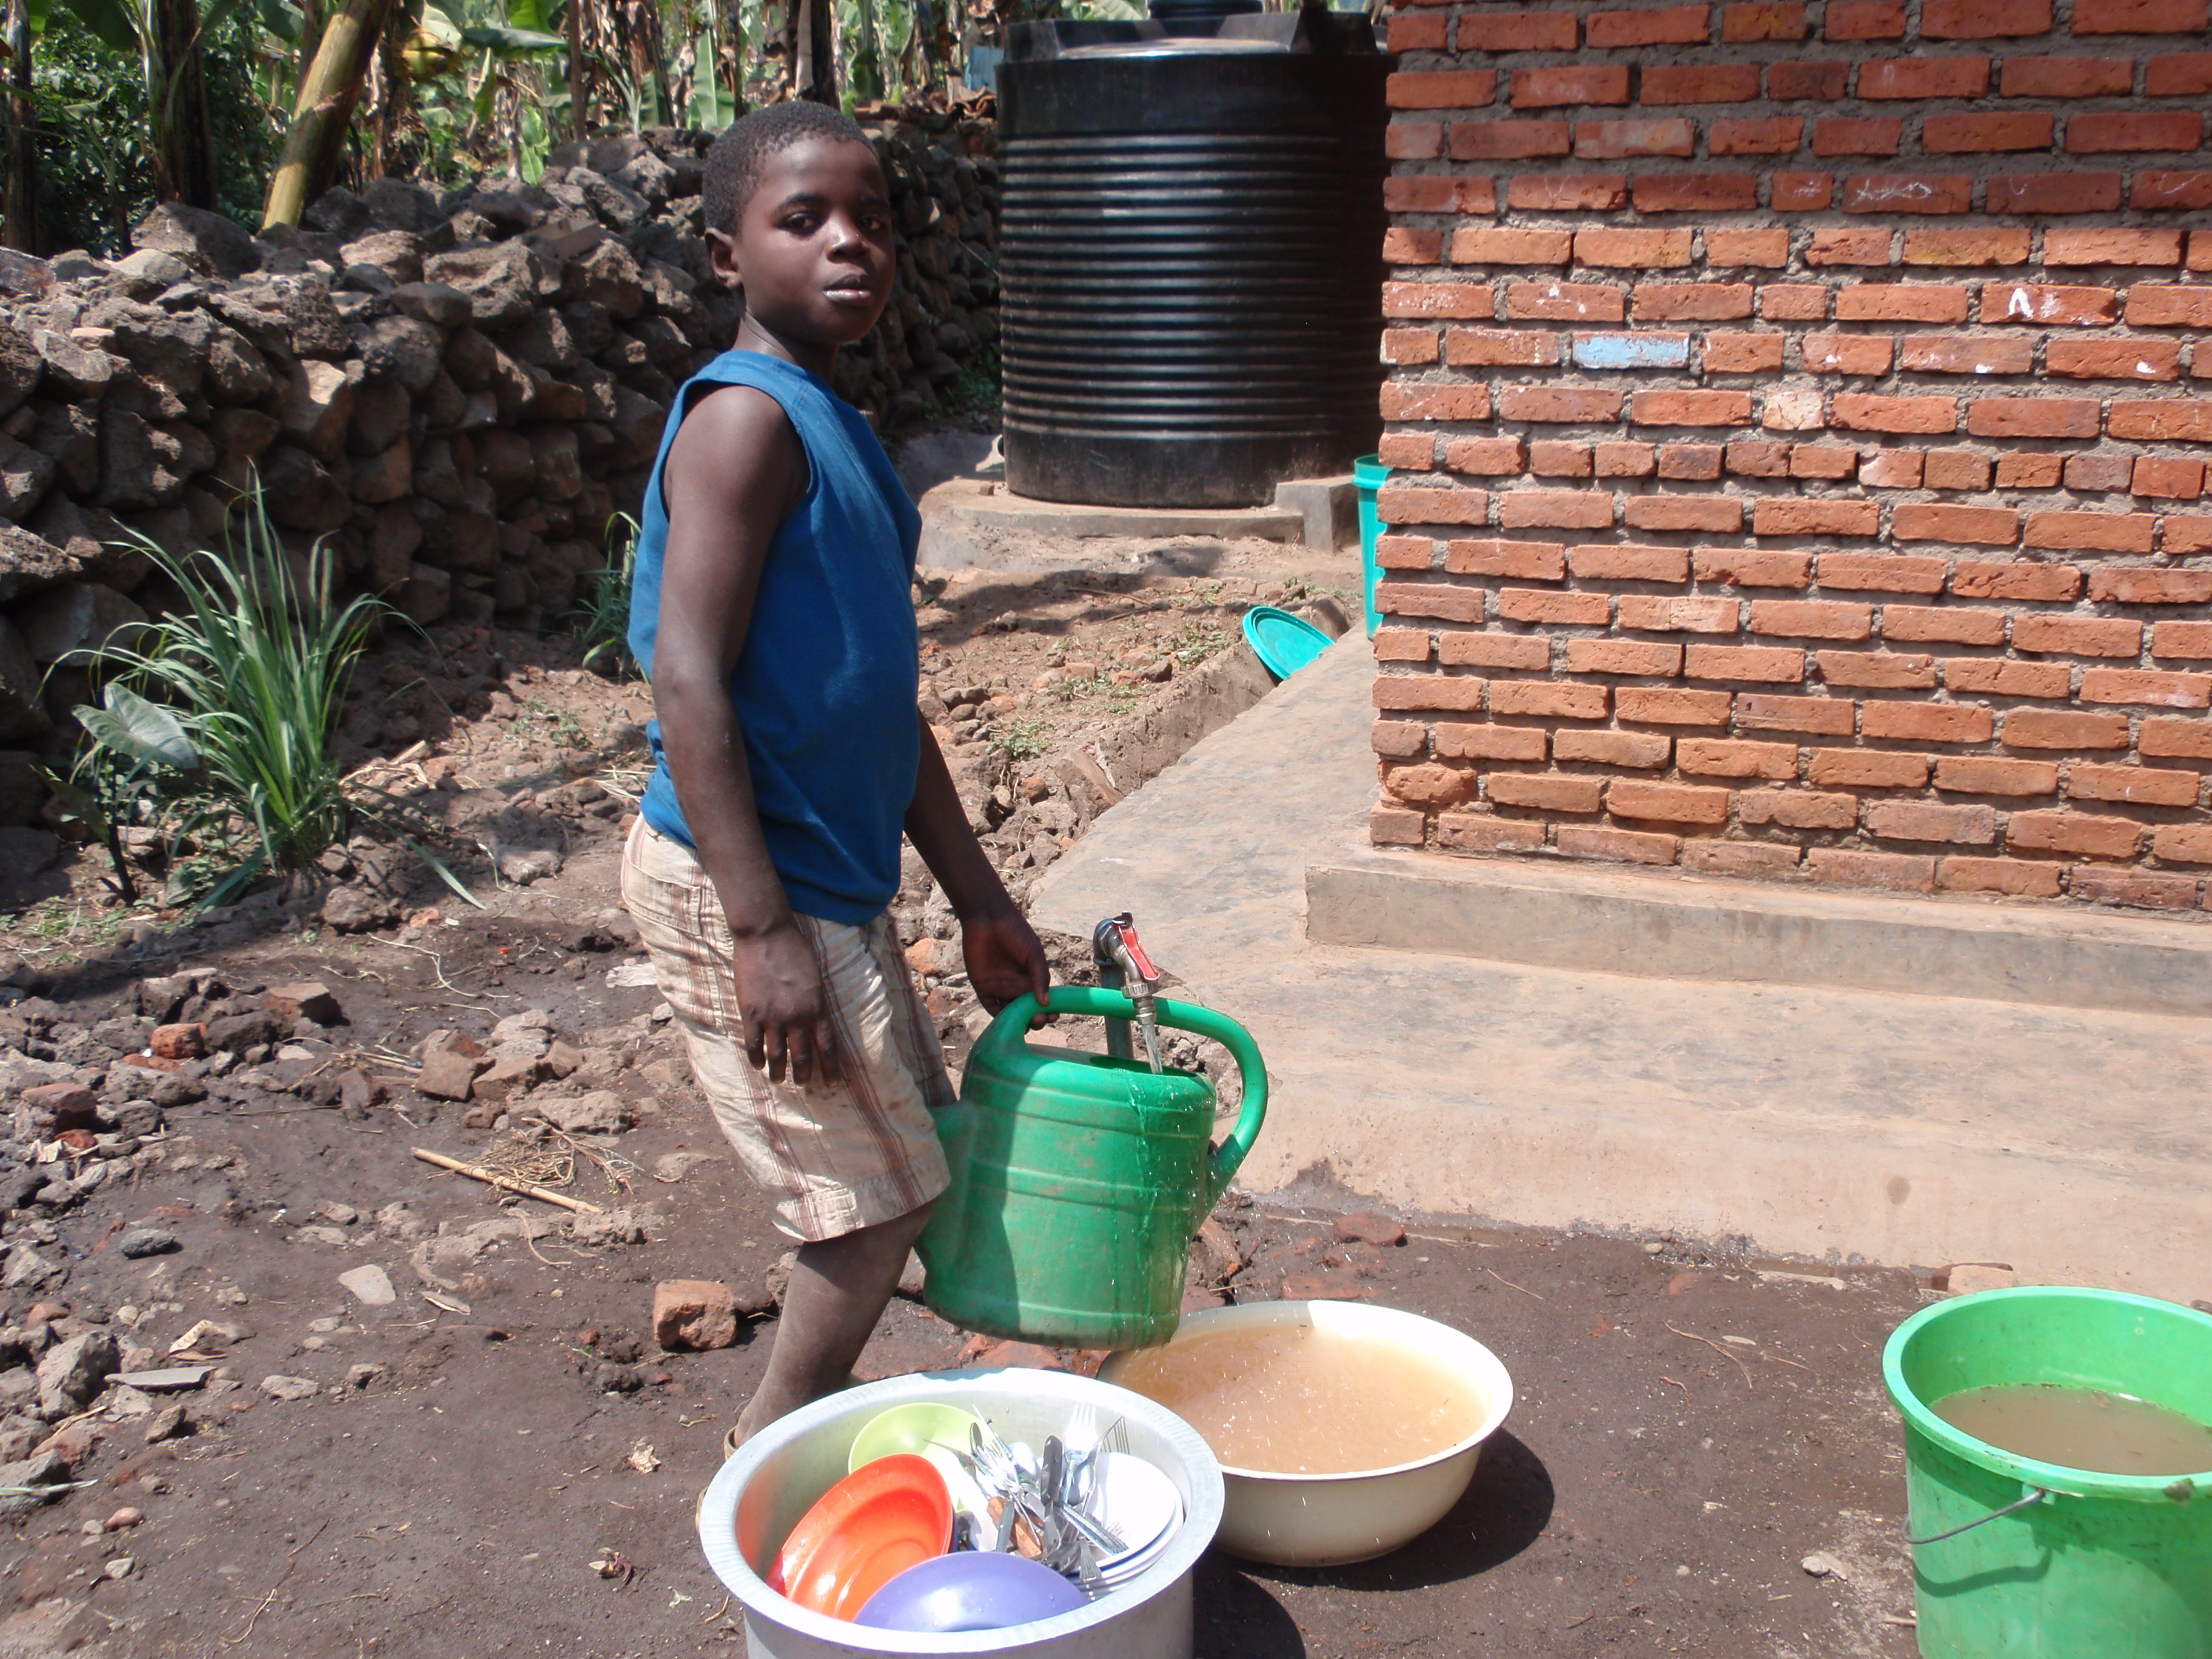 Village youngster fills watering can at newly installed water line.